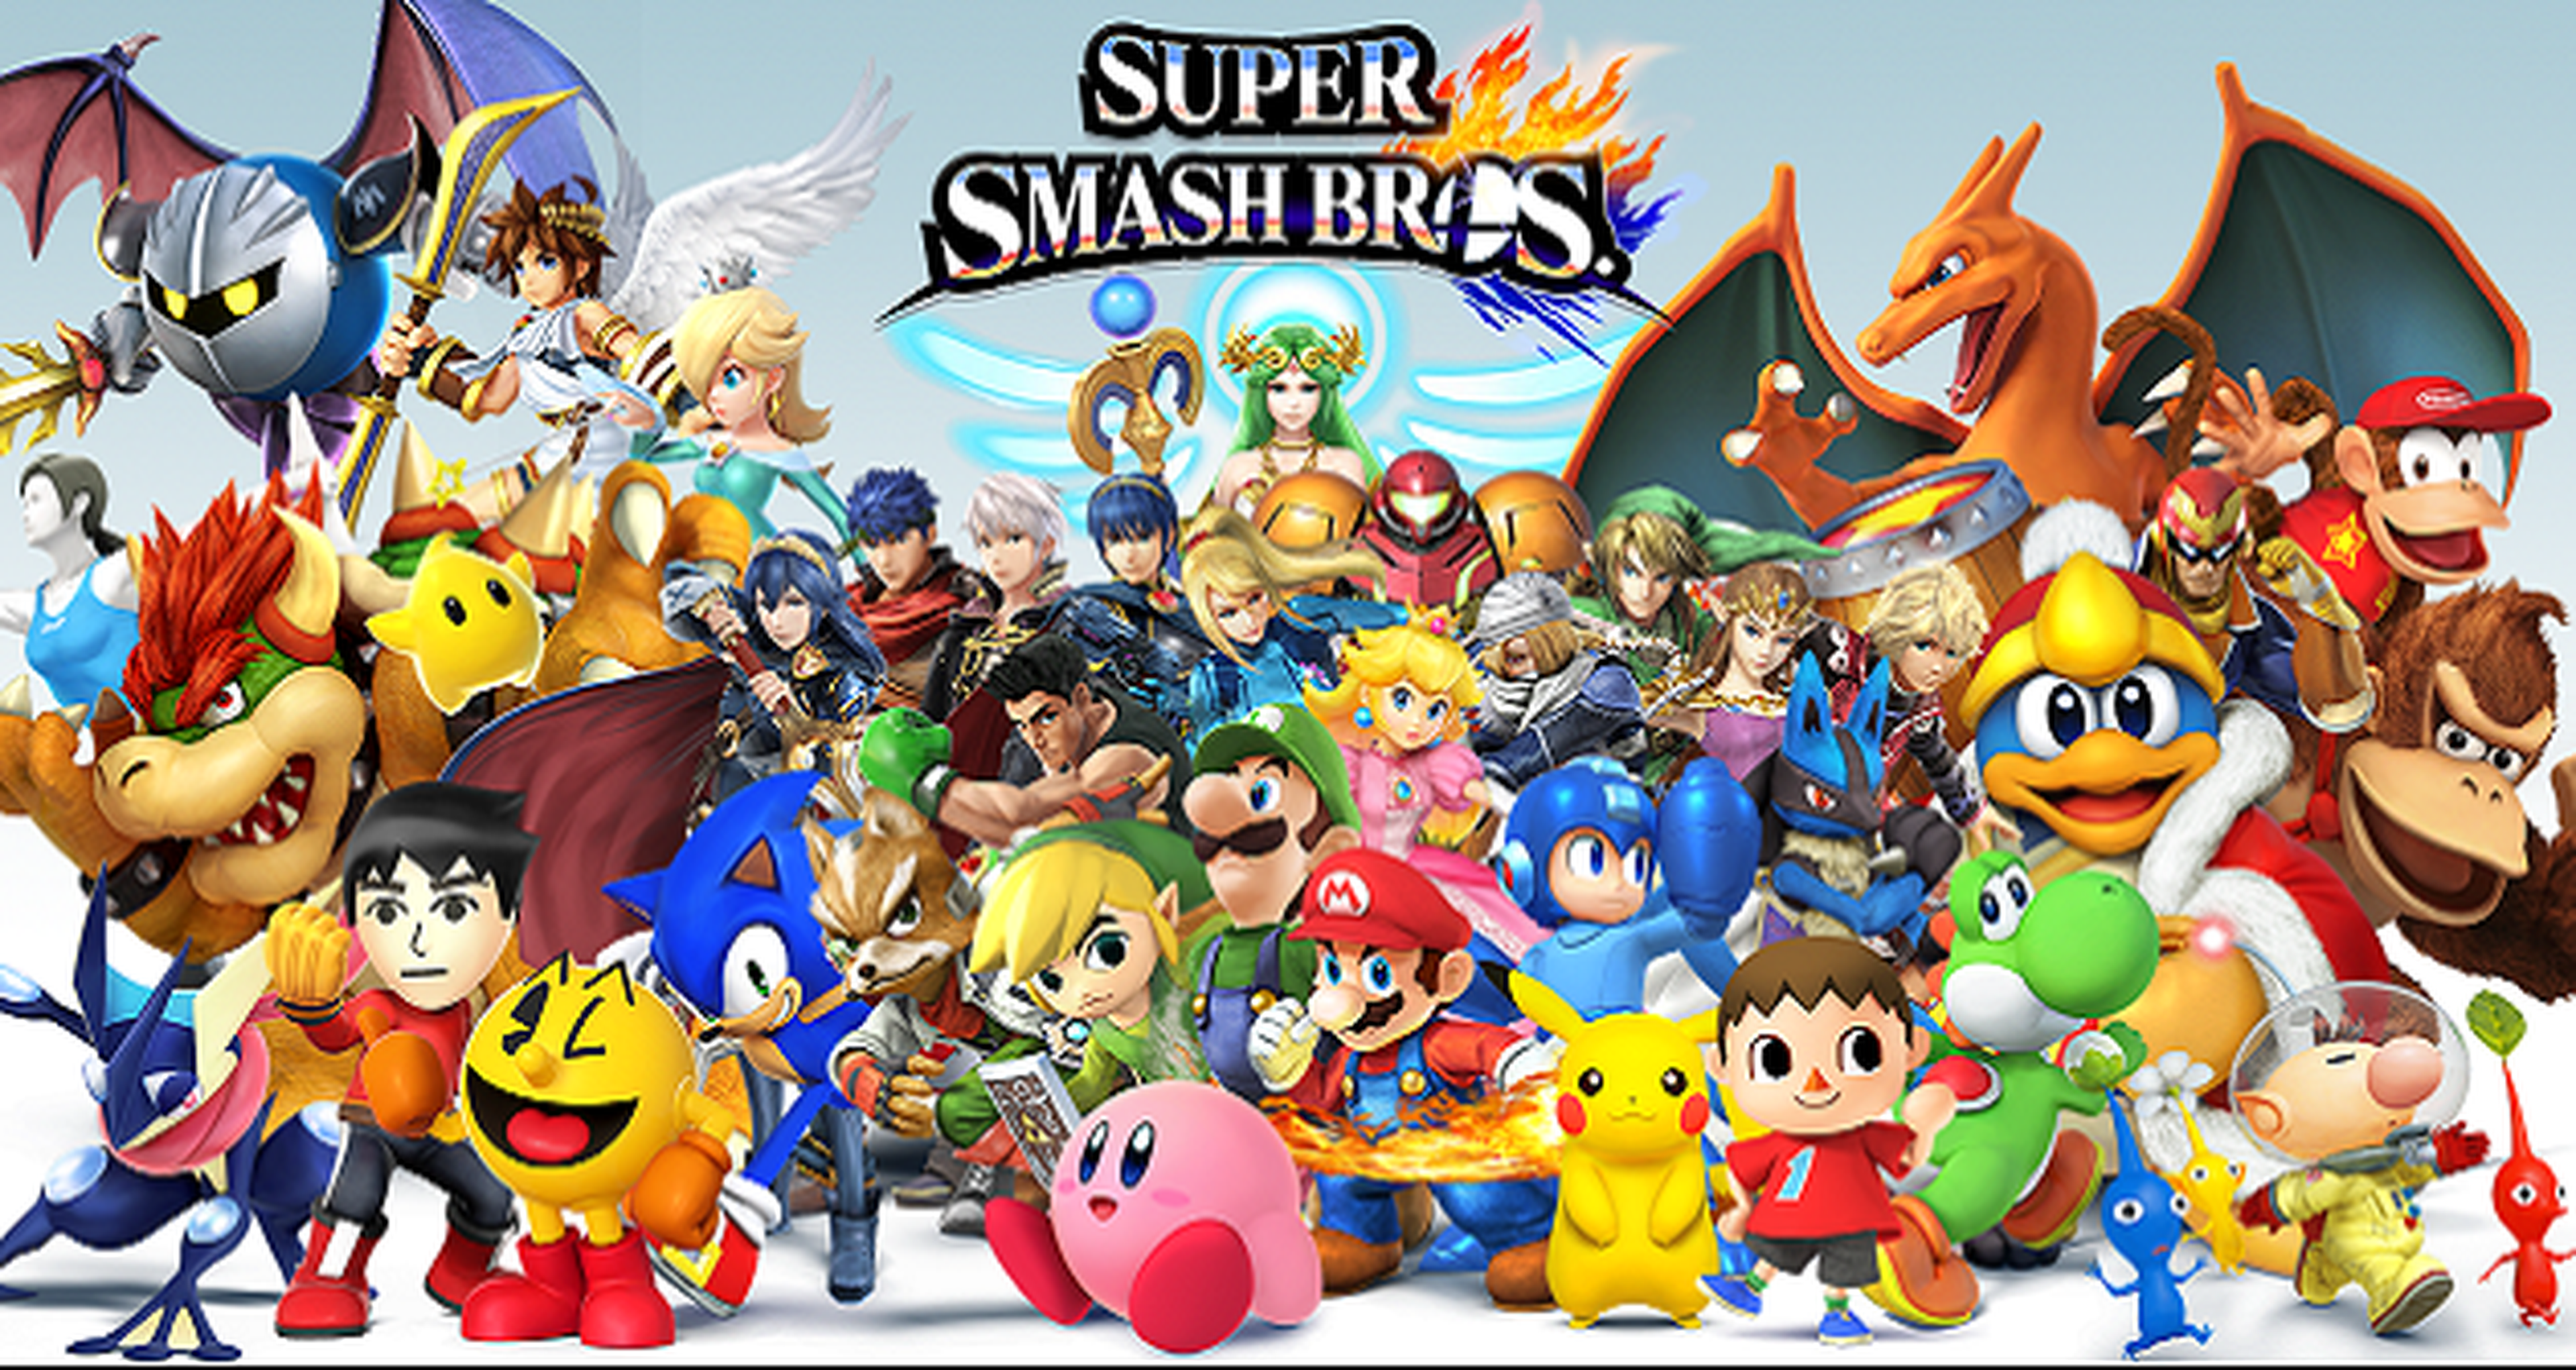 Super Smash Bros Wii U Is Currently Sitting At 94 On Metacritic